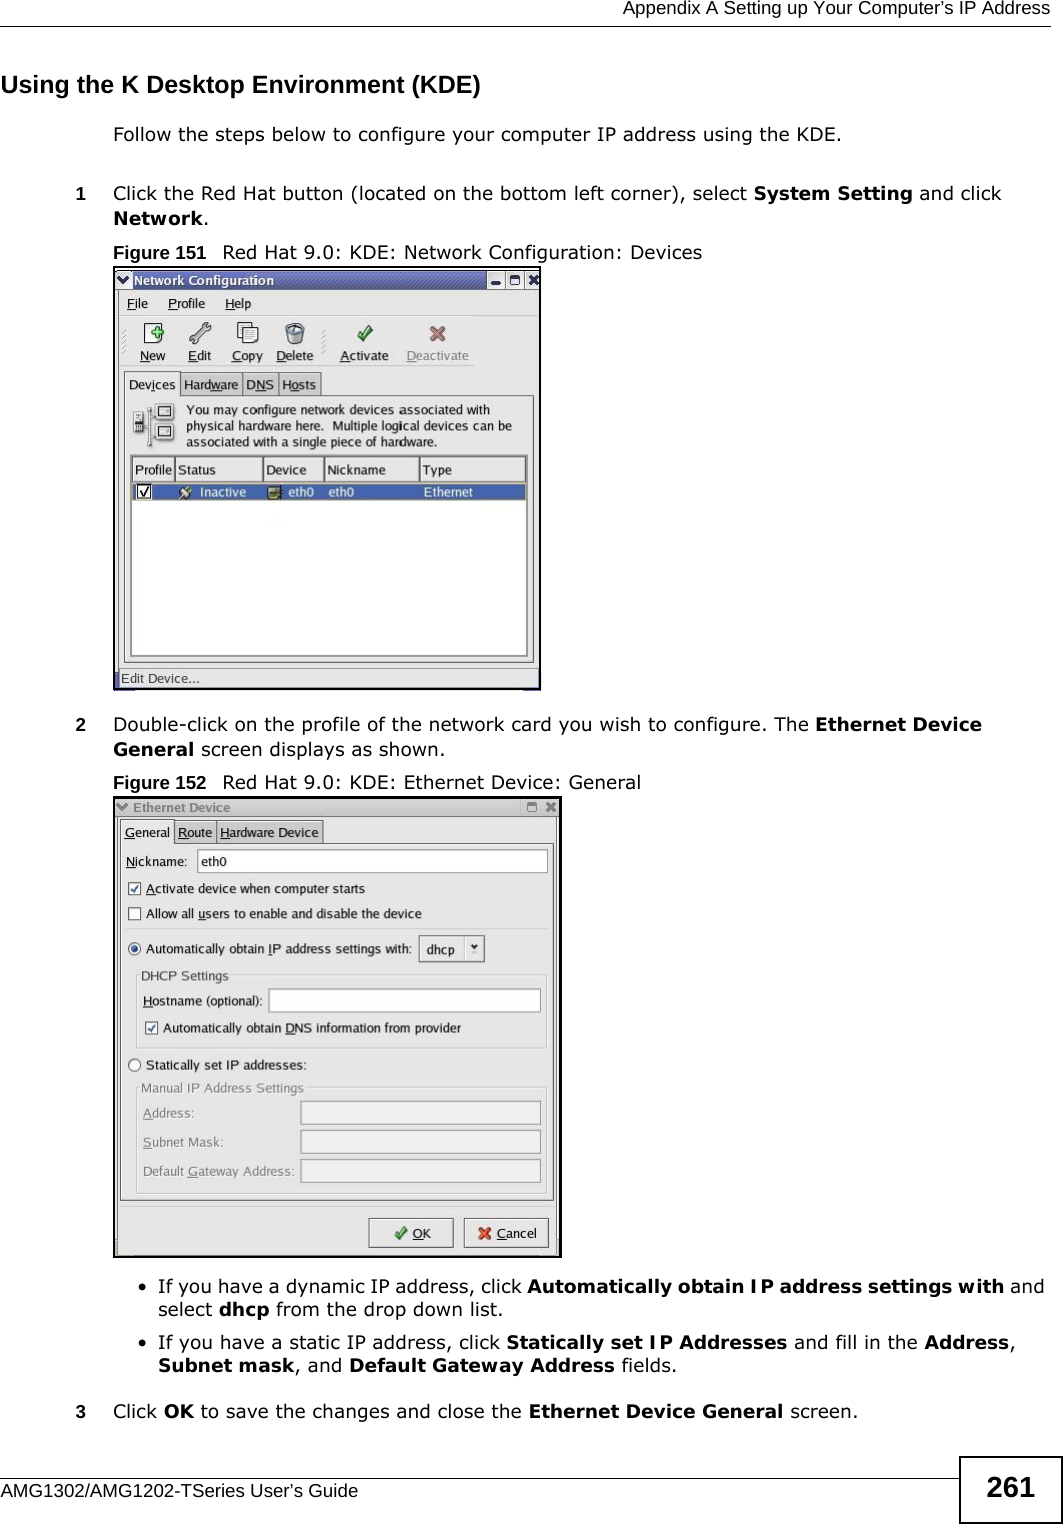  Appendix A Setting up Your Computer’s IP AddressAMG1302/AMG1202-TSeries User’s Guide 261Using the K Desktop Environment (KDE)Follow the steps below to configure your computer IP address using the KDE. 1Click the Red Hat button (located on the bottom left corner), select System Setting and click Network.Figure 151   Red Hat 9.0: KDE: Network Configuration: Devices 2Double-click on the profile of the network card you wish to configure. The Ethernet Device General screen displays as shown. Figure 152   Red Hat 9.0: KDE: Ethernet Device: General  • If you have a dynamic IP address, click Automatically obtain IP address settings with and select dhcp from the drop down list. • If you have a static IP address, click Statically set IP Addresses and fill in the Address, Subnet mask, and Default Gateway Address fields. 3Click OK to save the changes and close the Ethernet Device General screen. 